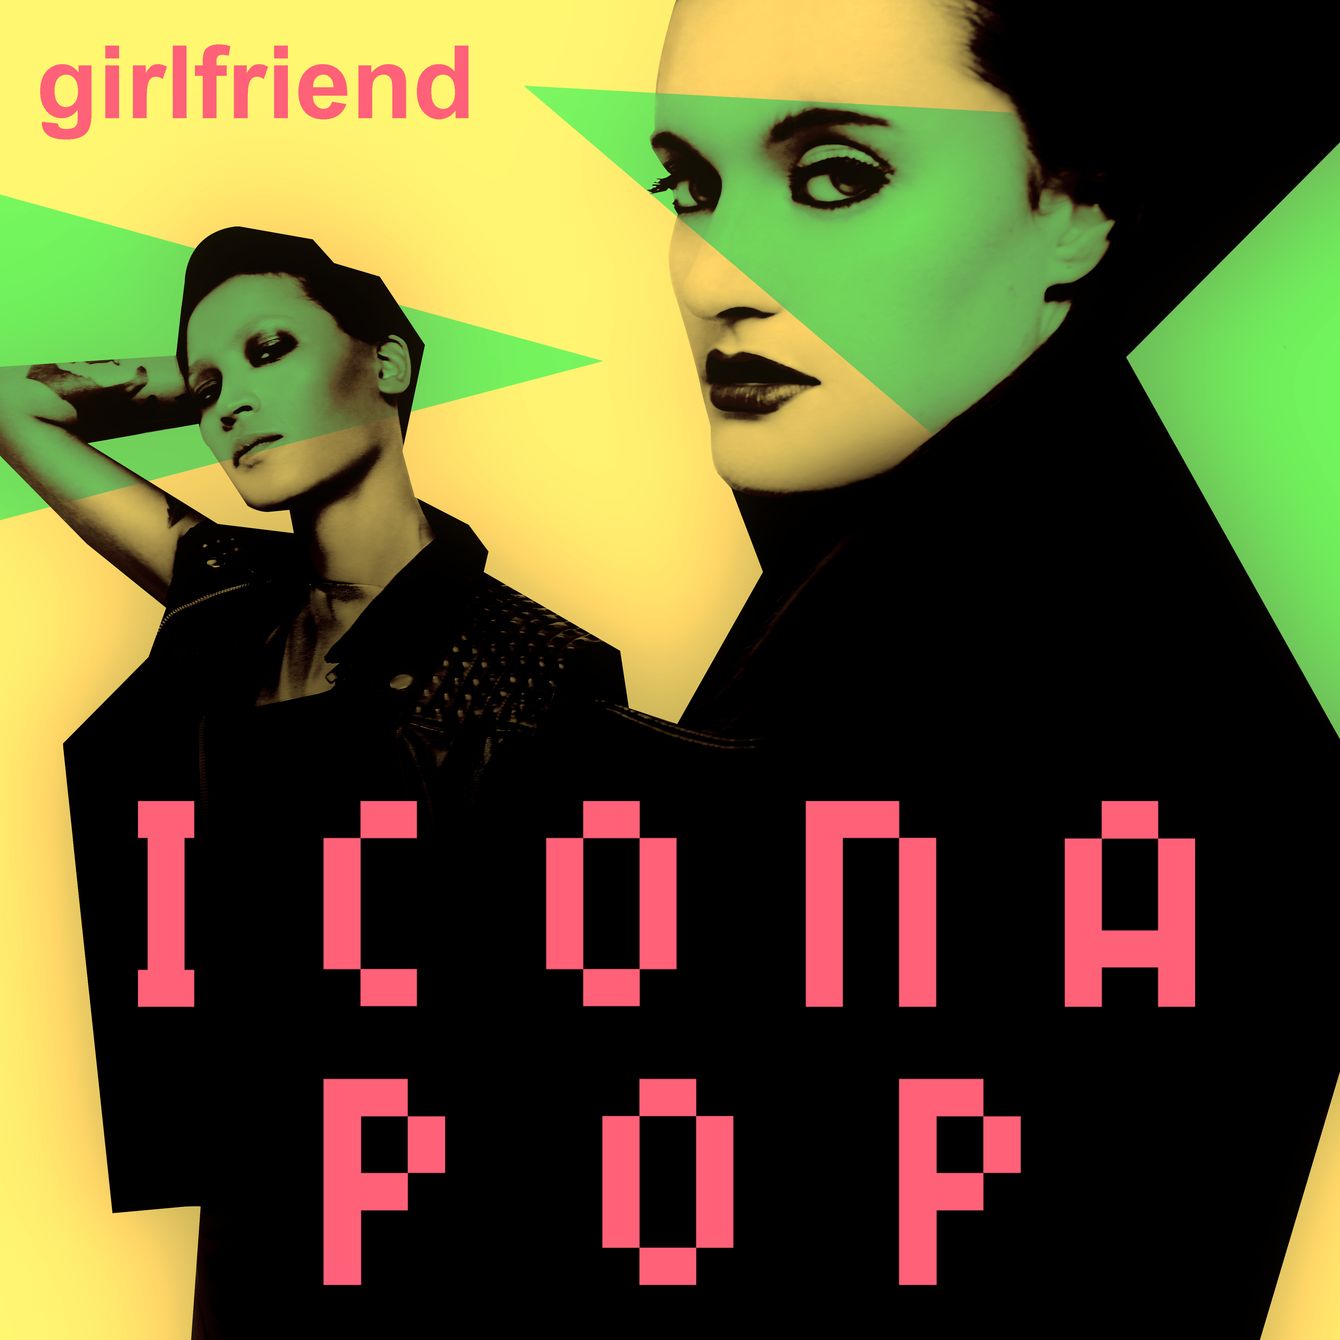 Icona Pop - Girlfriend CD borító - Cover picture for single Girlfriend by Icona Pop.